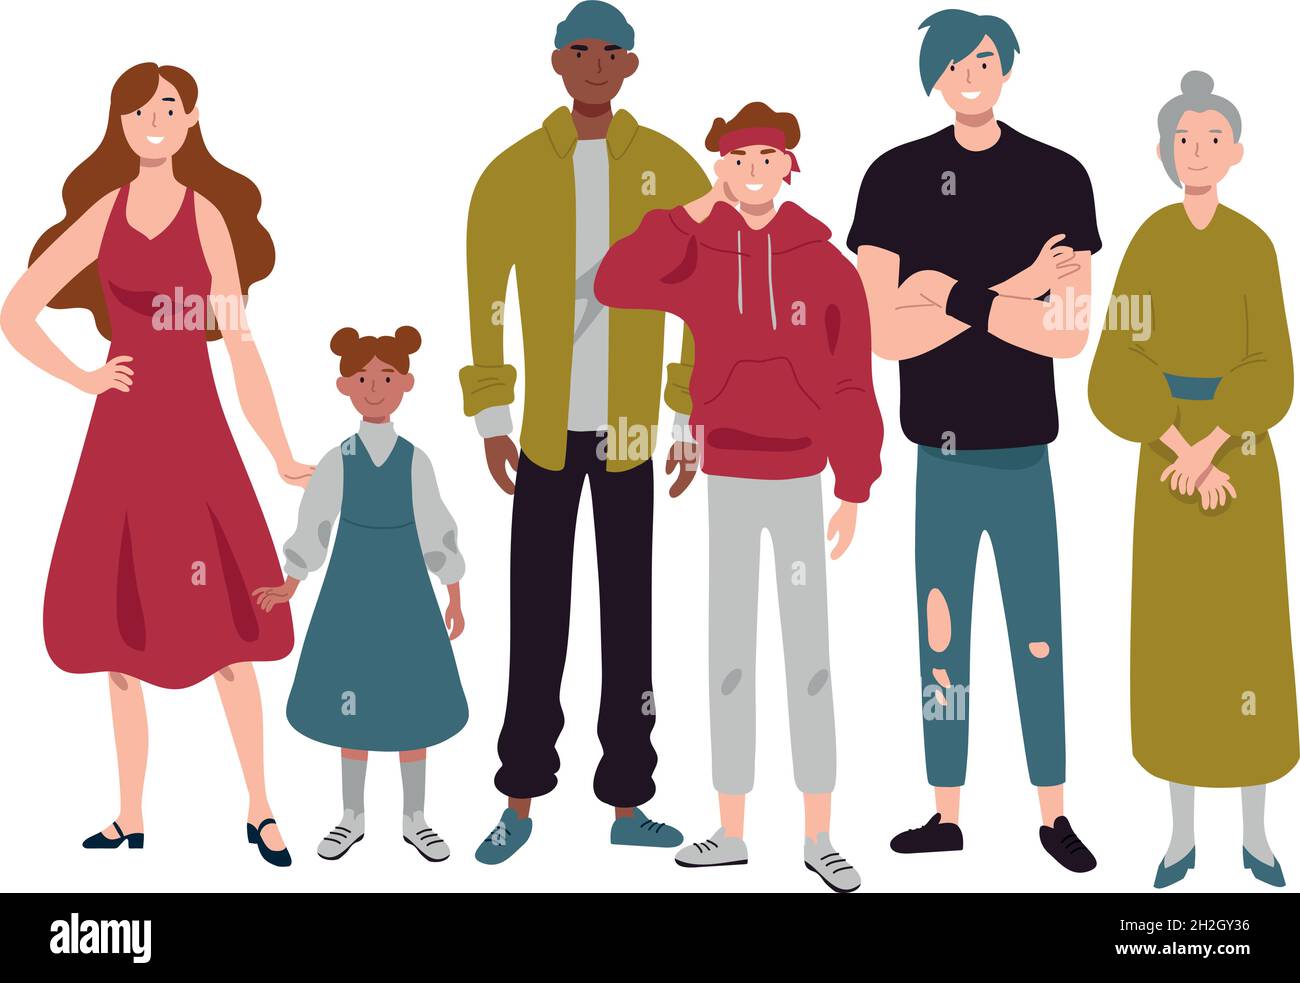 Group of people of different ages childhood youth middle and old. Stock Vector